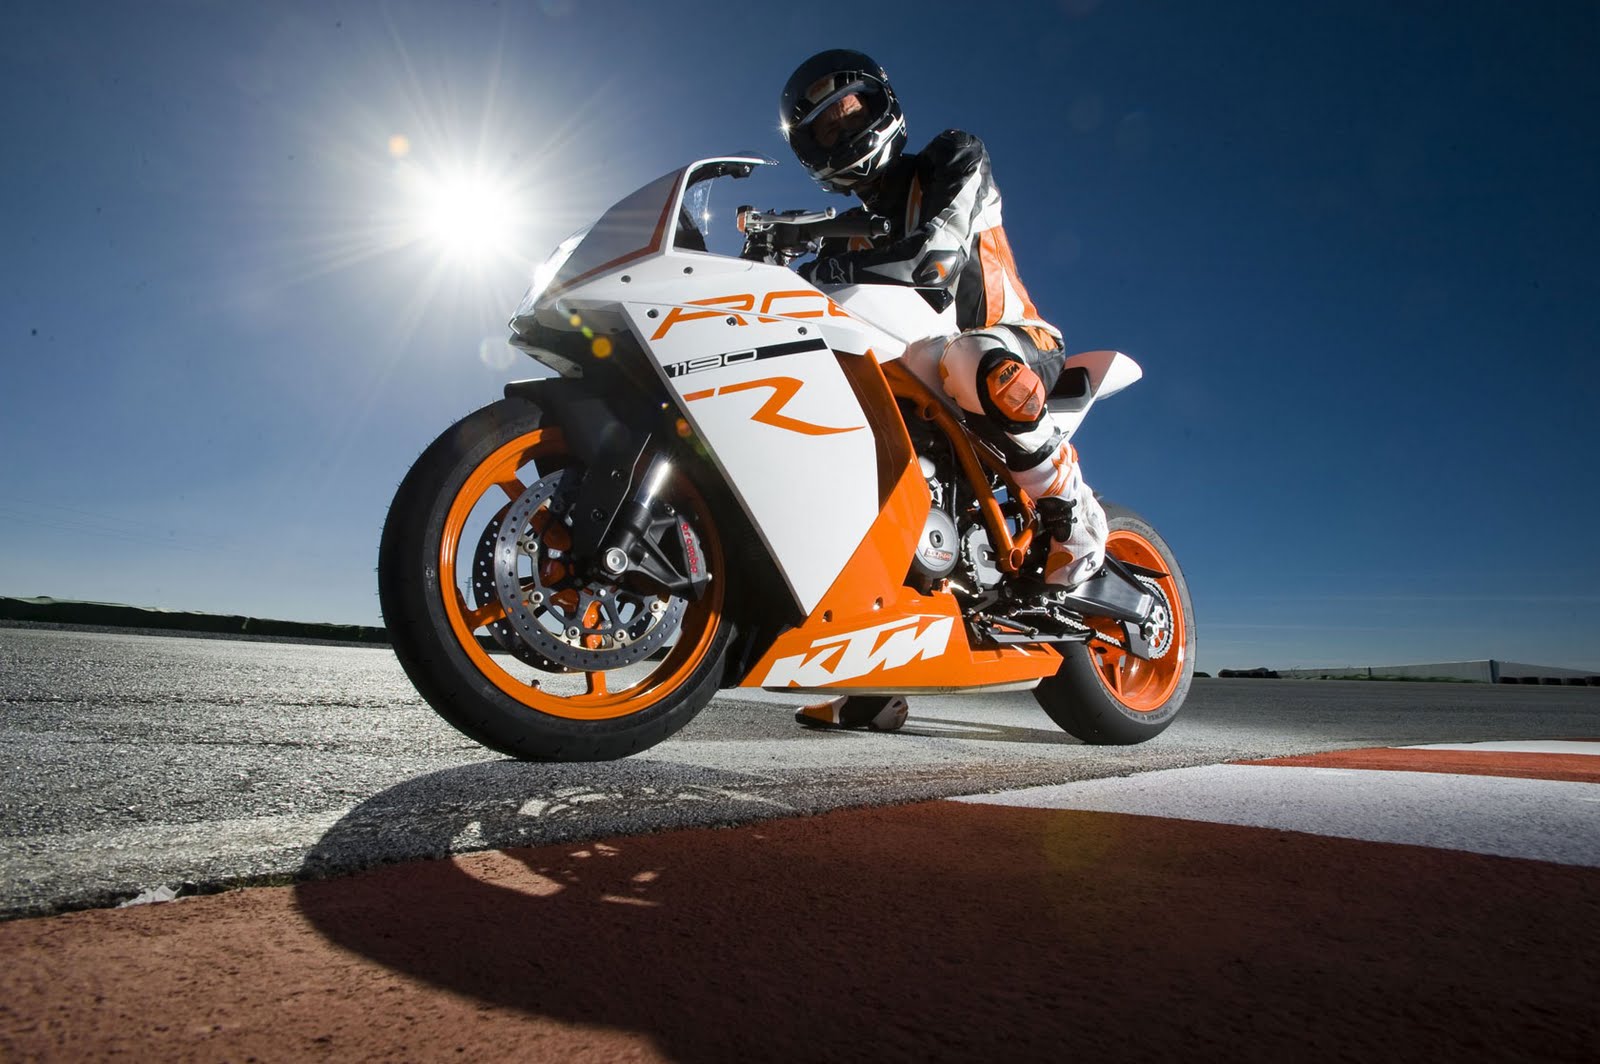 KTM 1190 RC8 R Images, Wallpapers and Photos